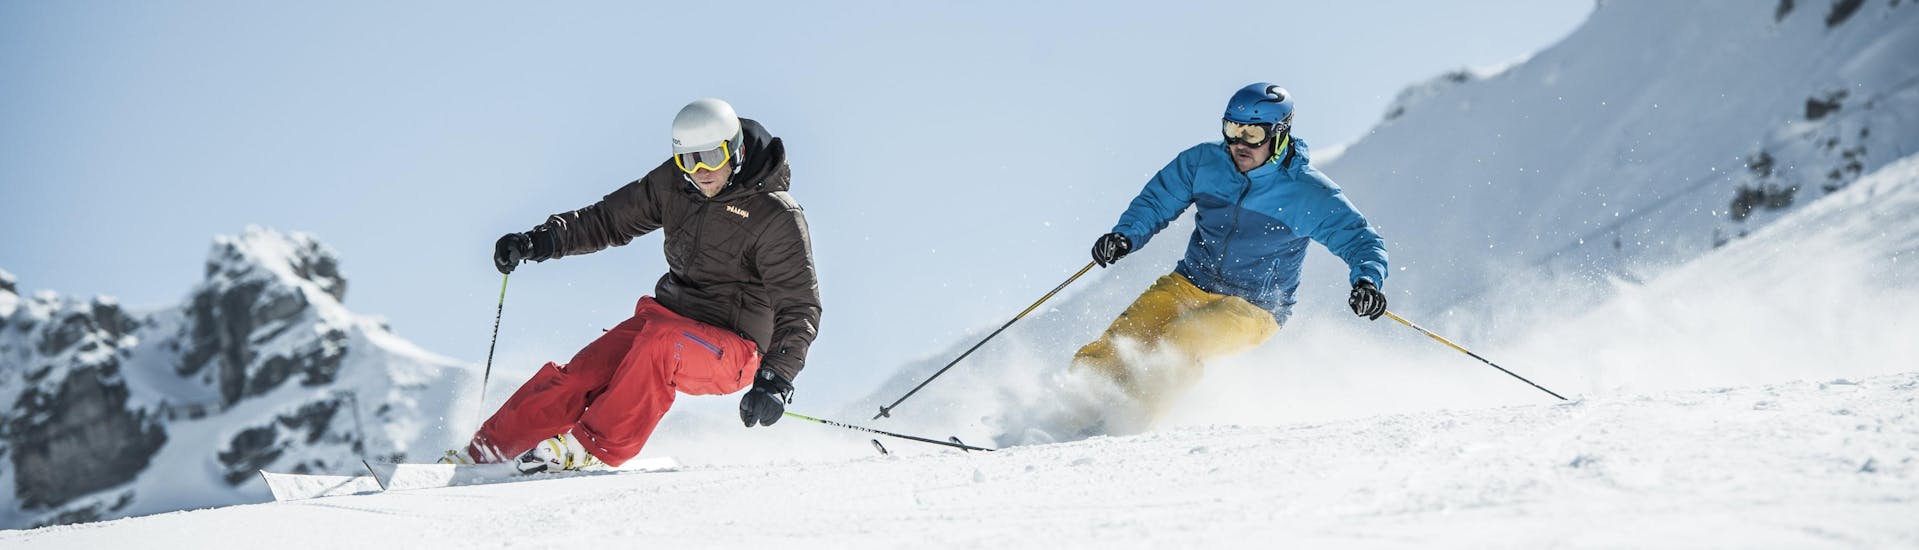 A skier practices the correct skiing technique during one of the private lessons in Ski Amadé Salzburger Sportwelt.